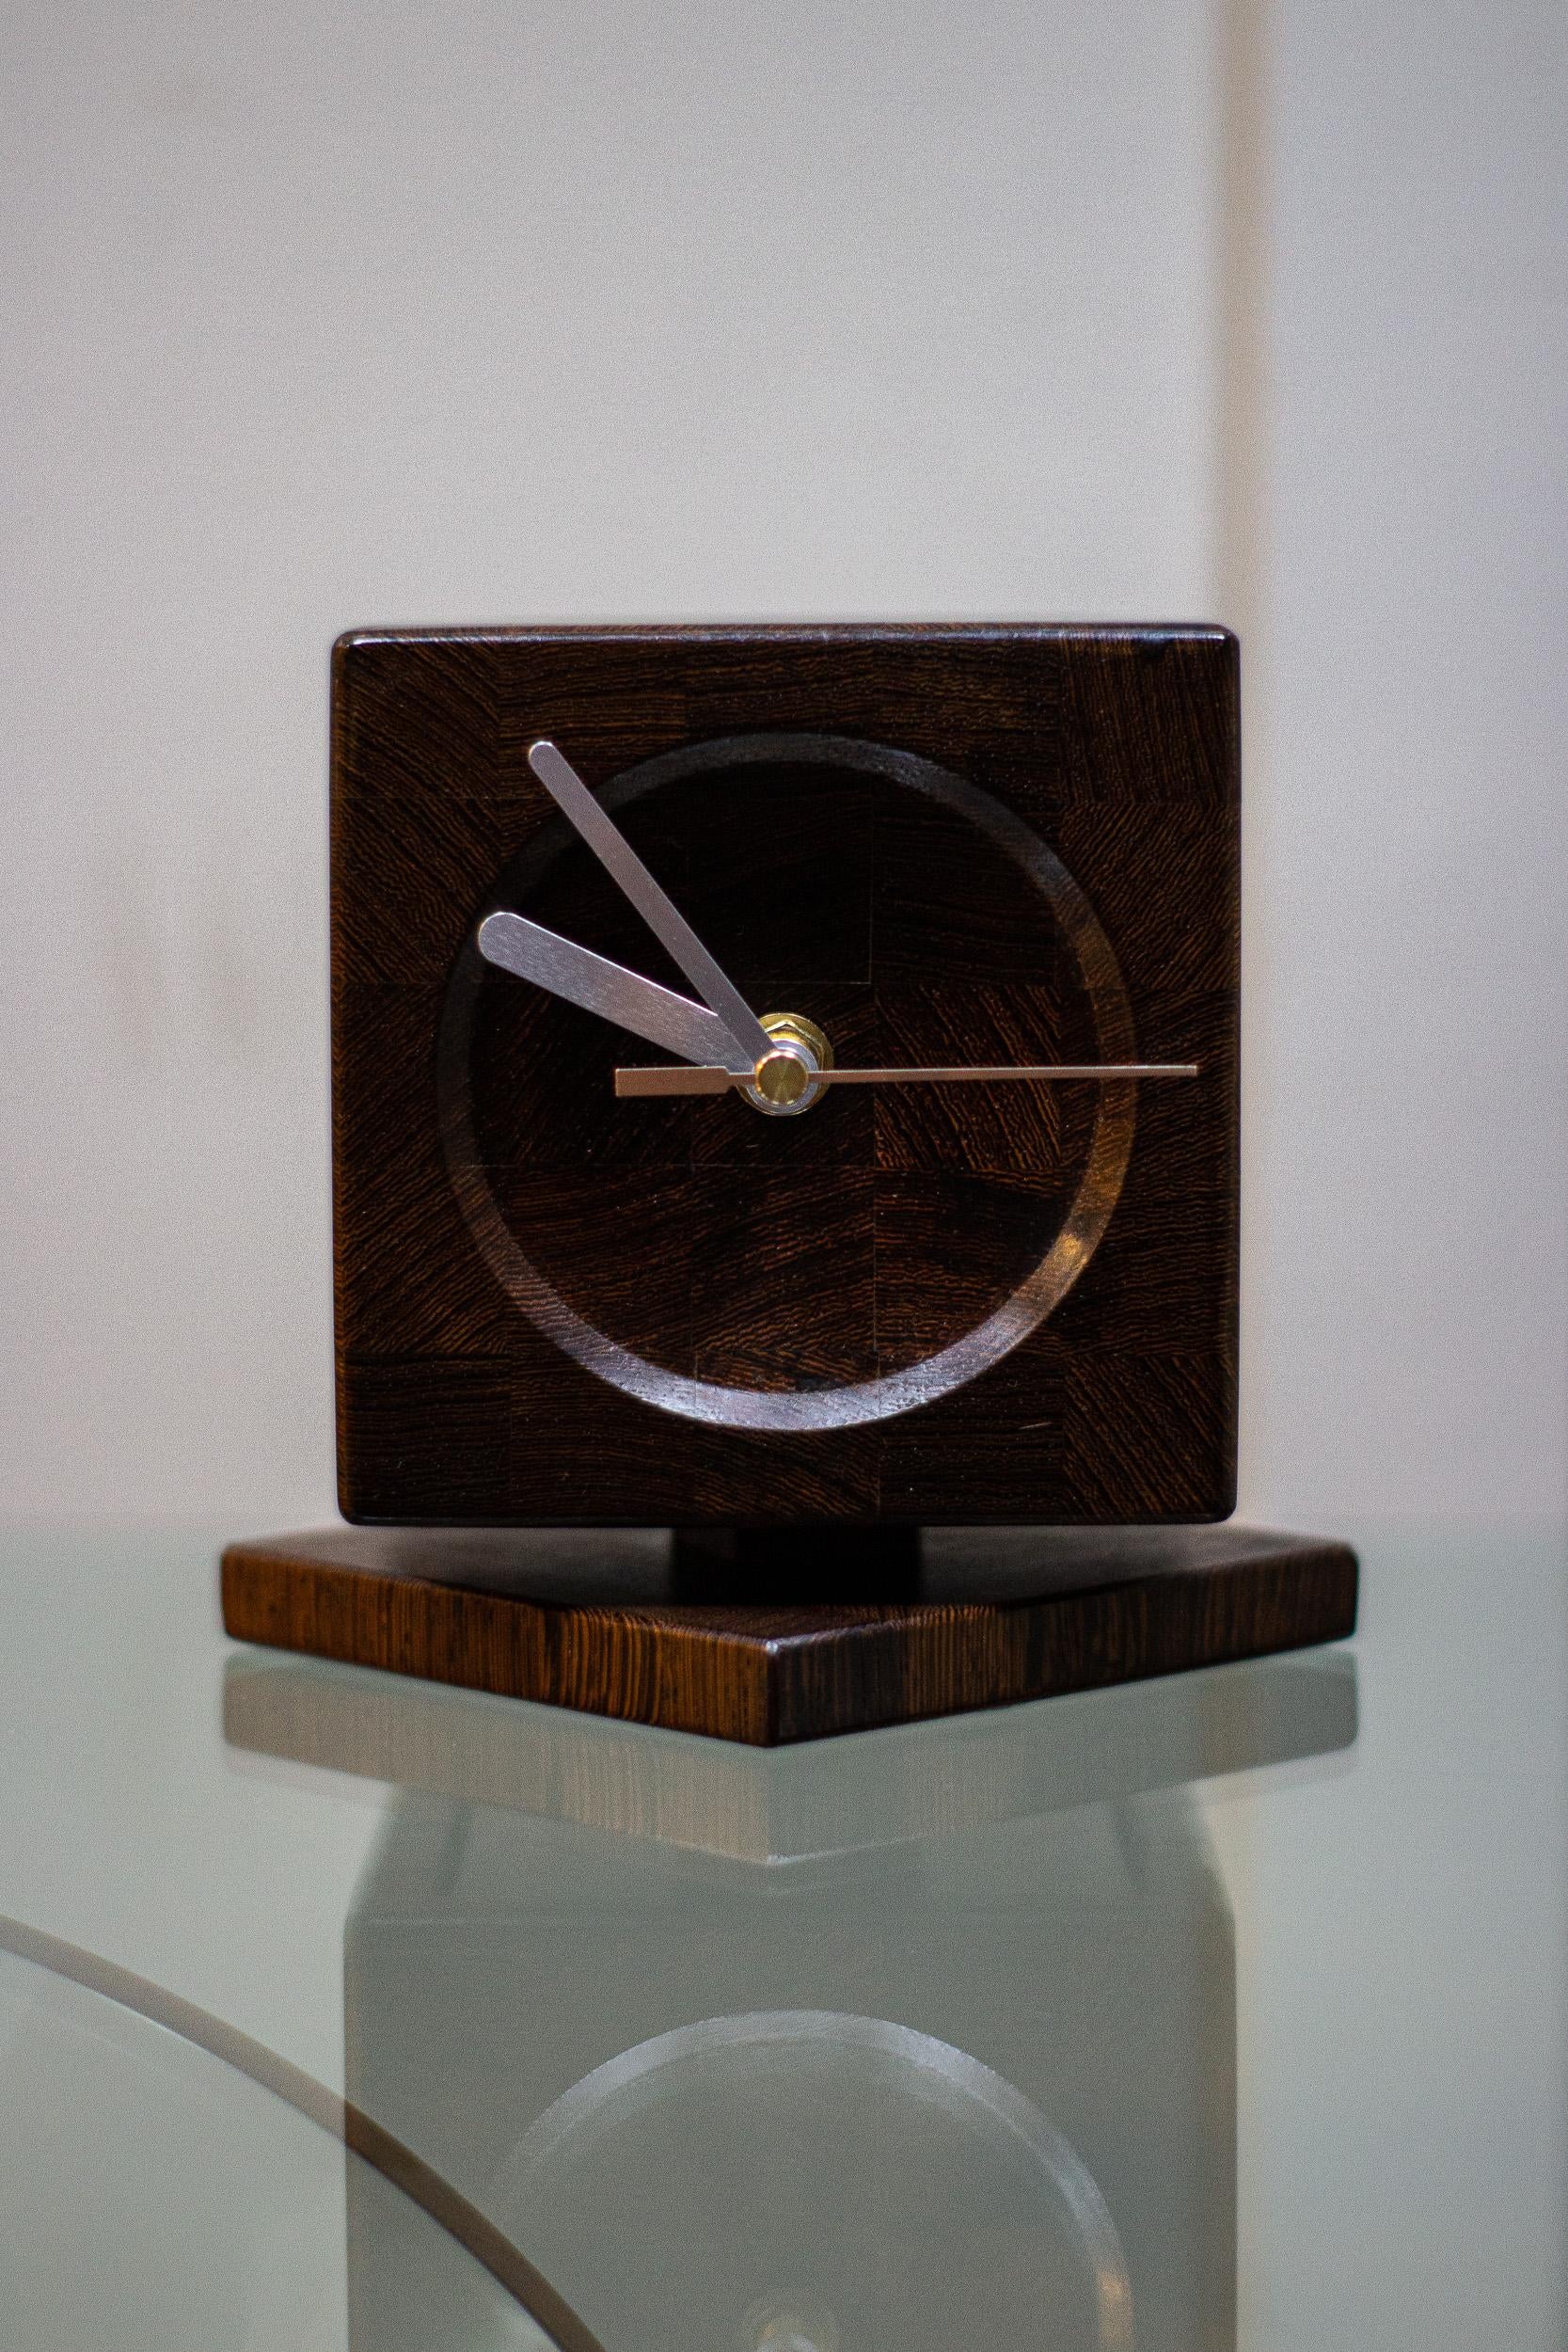 A 1960s clock by Danish maker Lysgaard Mobler, the clock is made of a tropical hard wood very similar to rosewood. 

The clock has a new movement put in it and is battery operated. 

The clock can be rotated 360 degrees on the base.